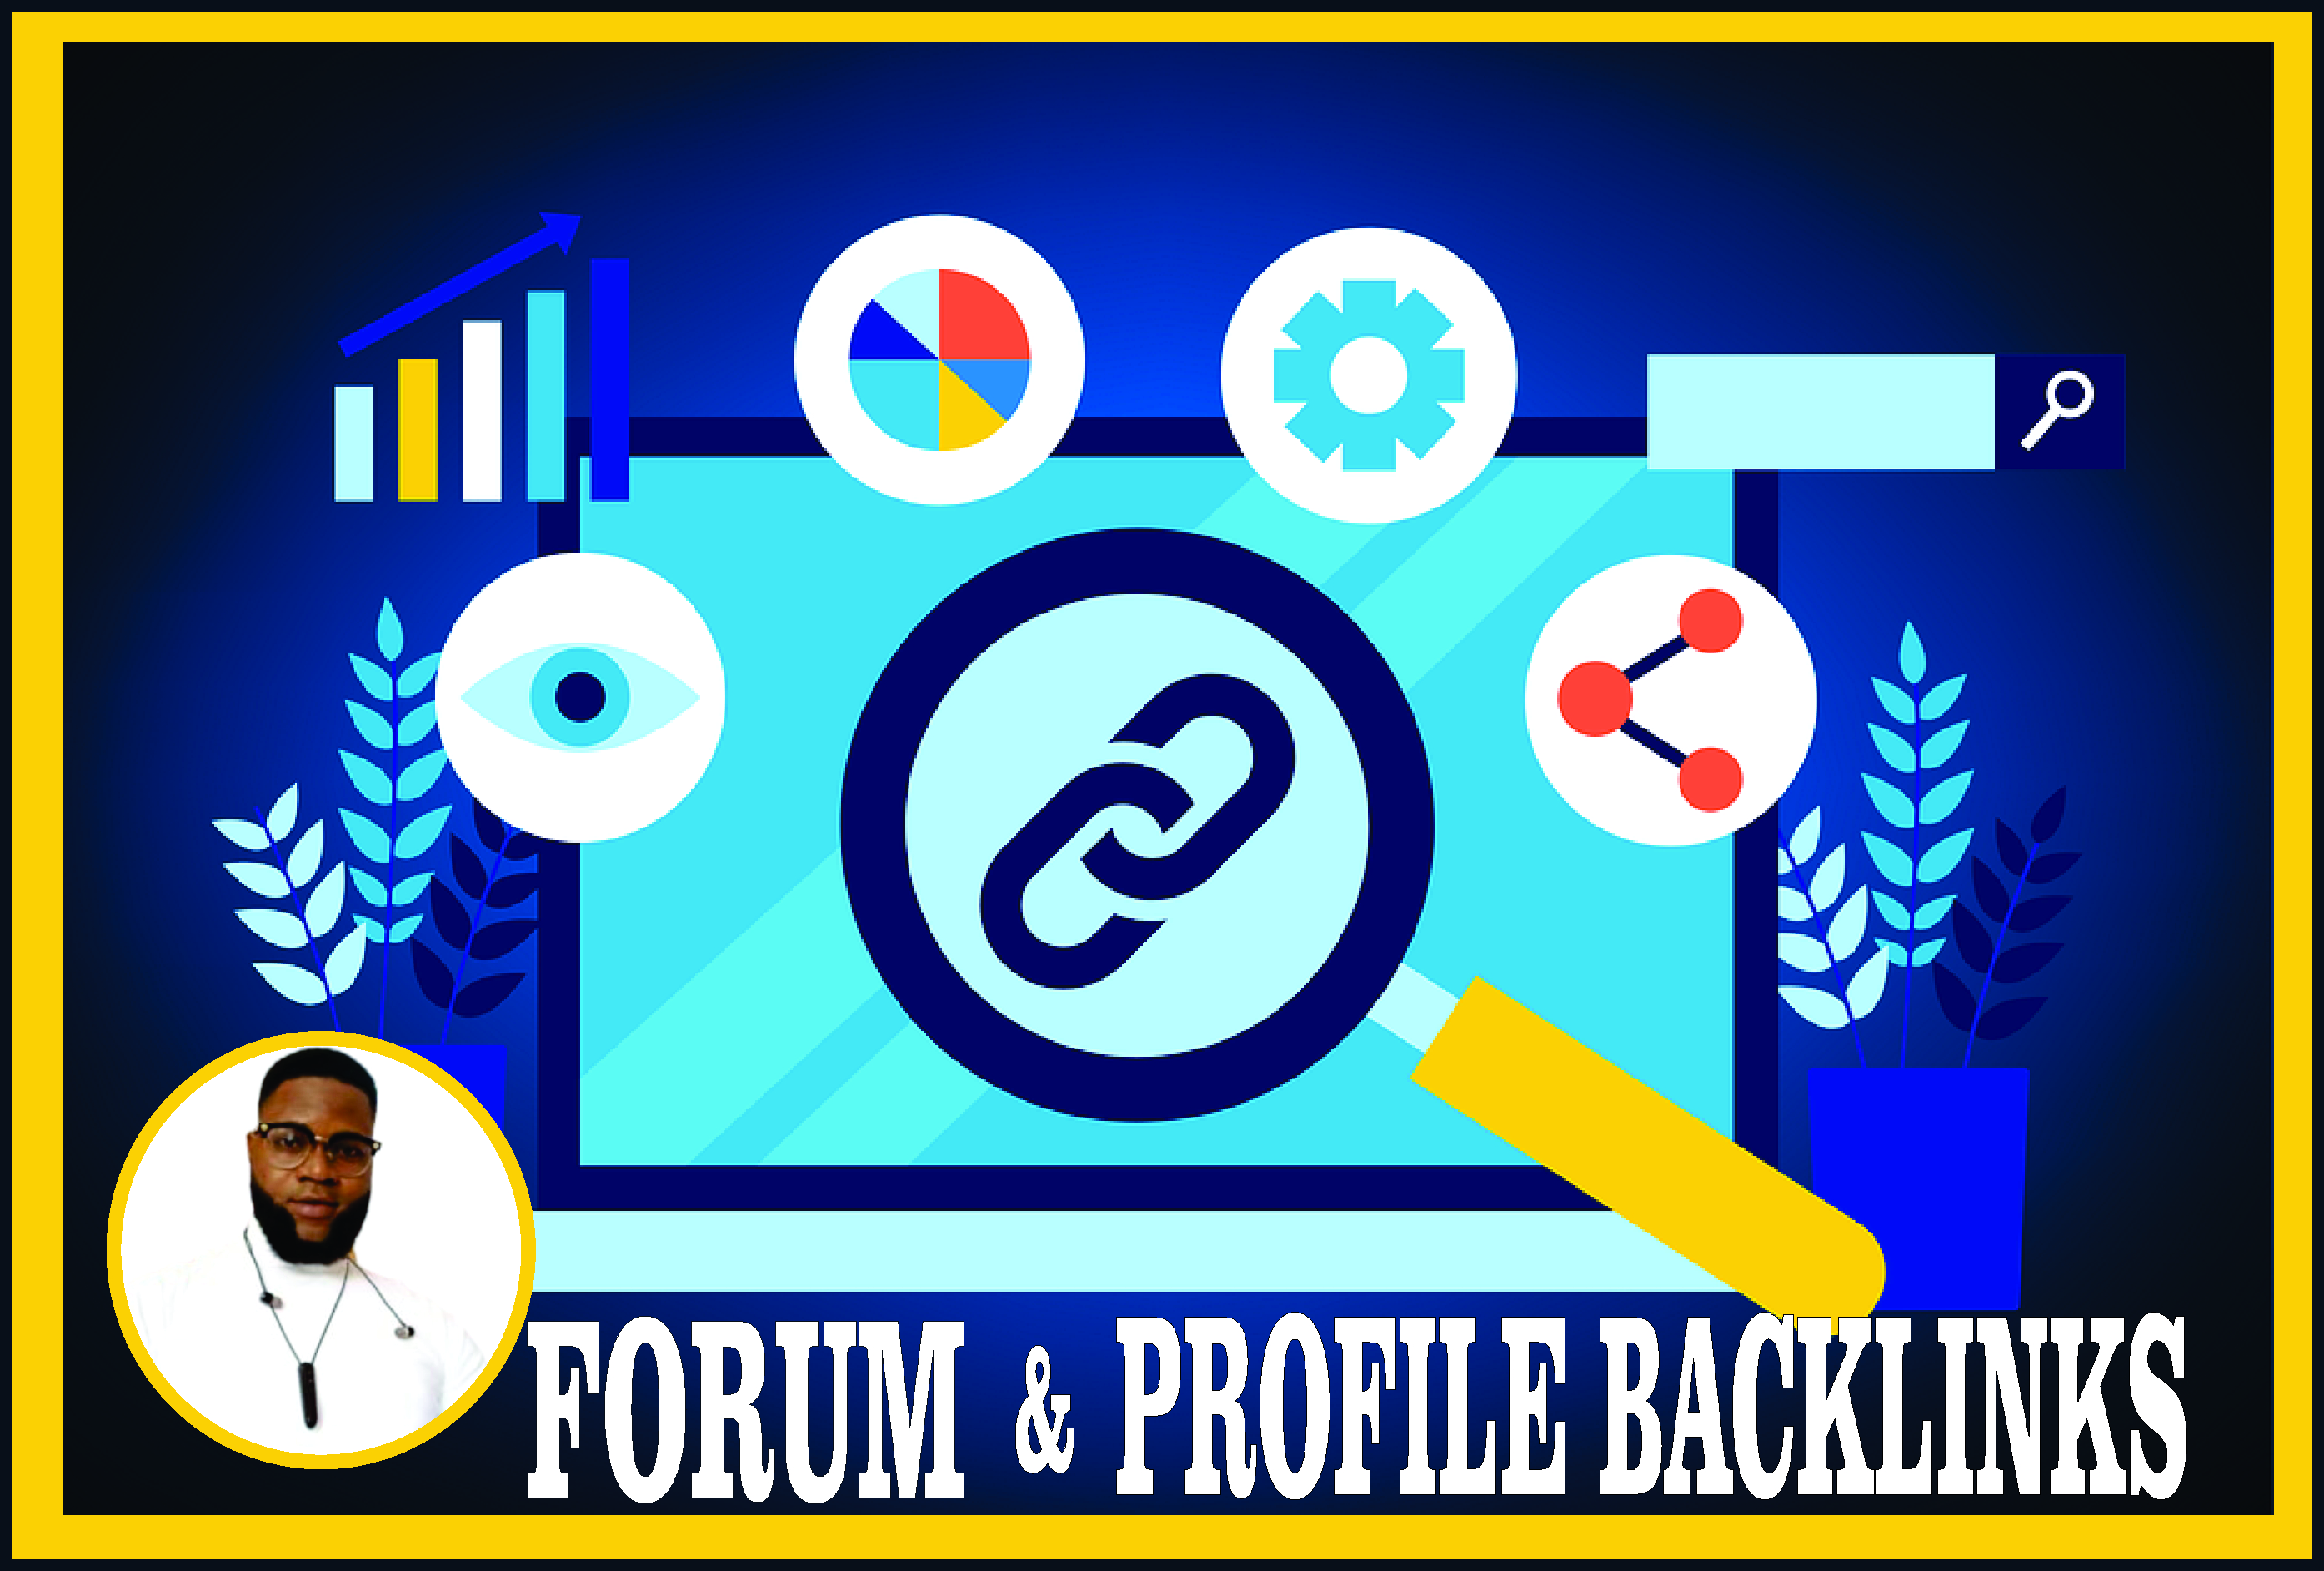 ﻿I will do 3000 high-quality forum profile backlinks to boost your Google ranking.